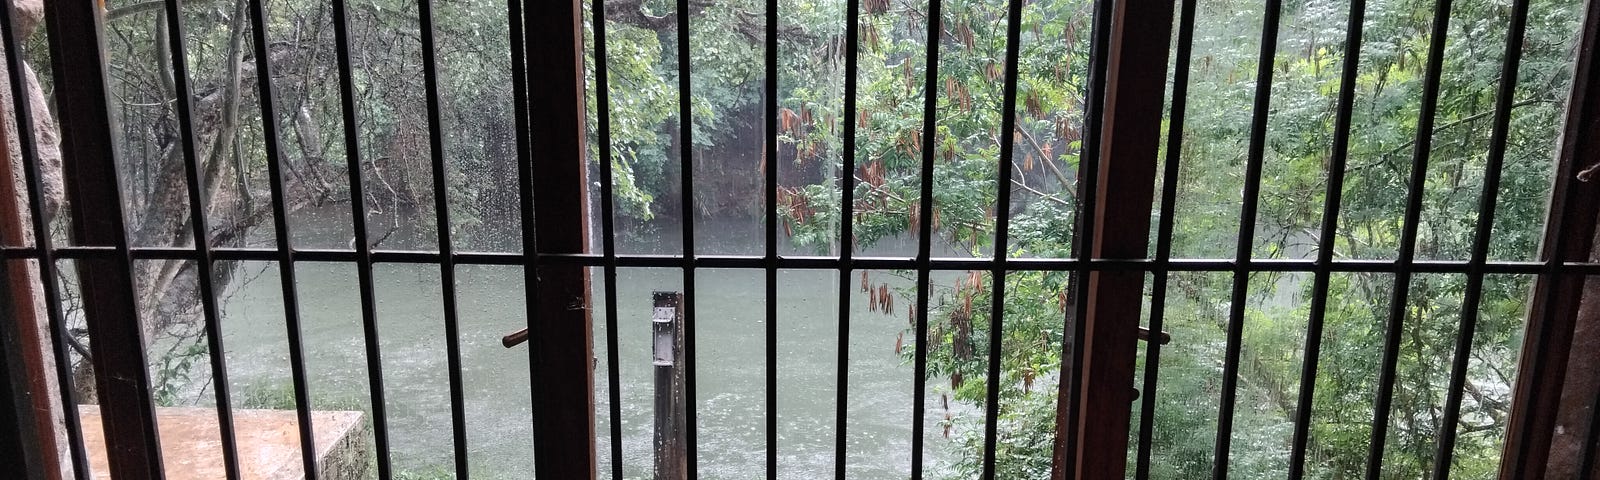 A view of a river and trees through burglar bars in front of a window